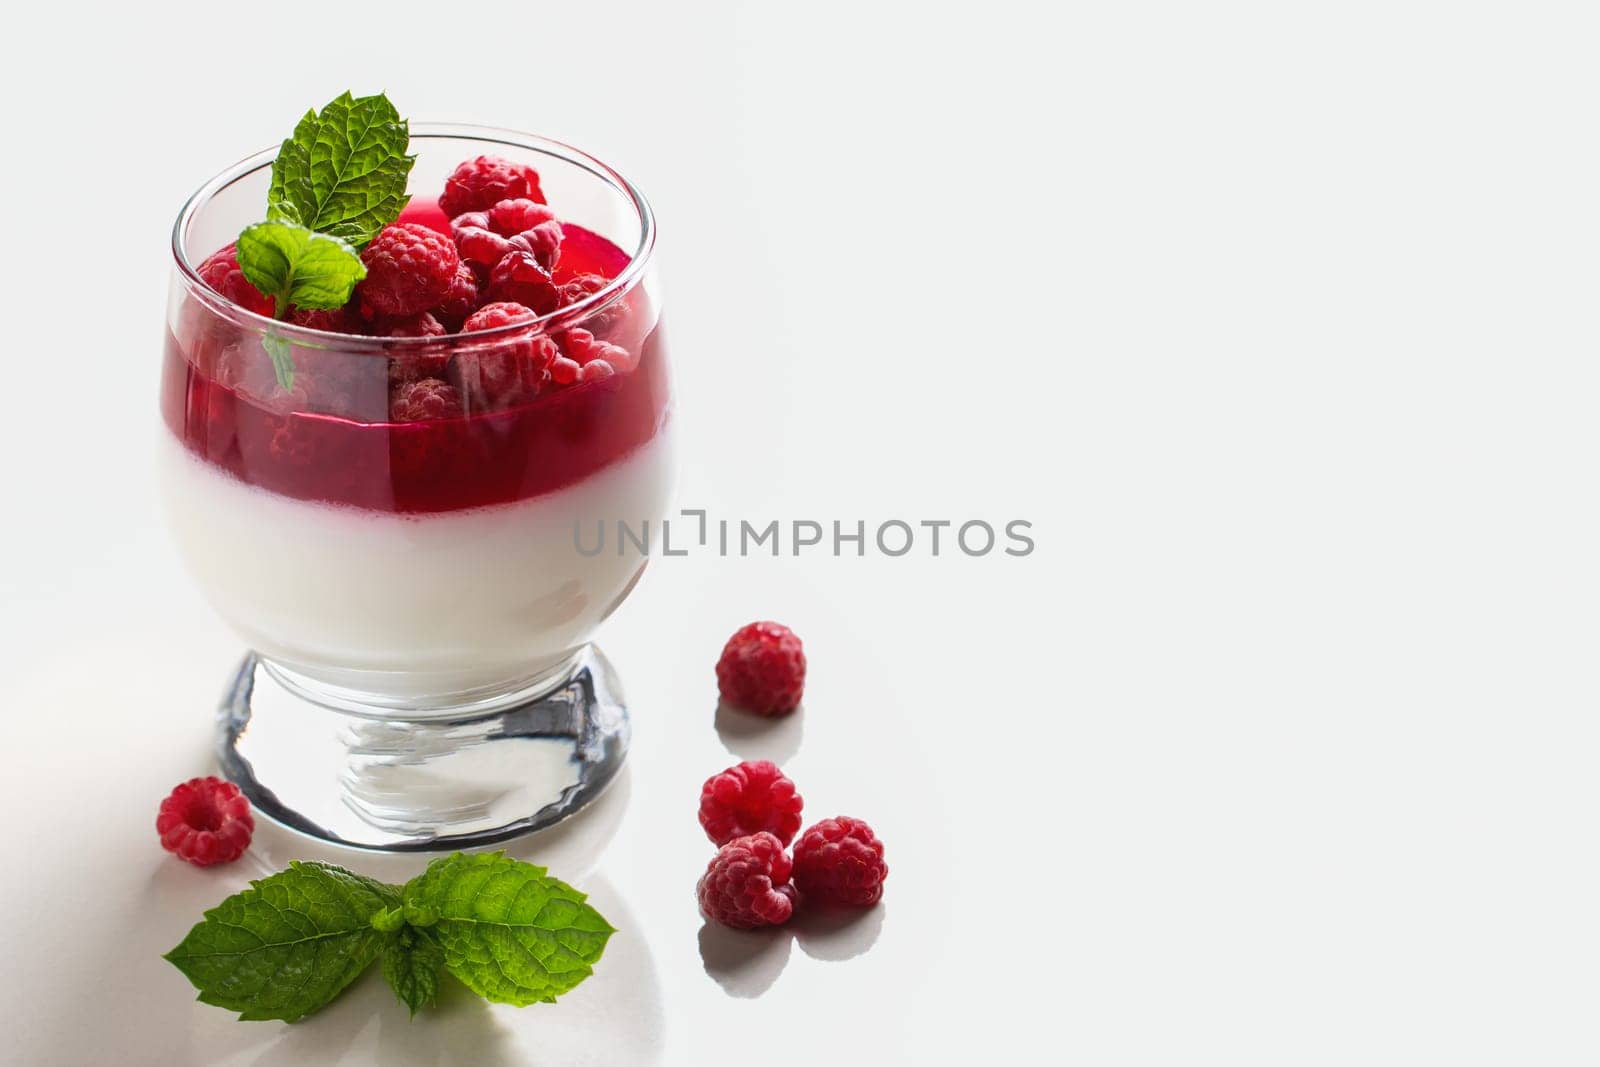 Panna cotta with raspberry jelly and mint leaves in glass glasses on a white table, copyspace.